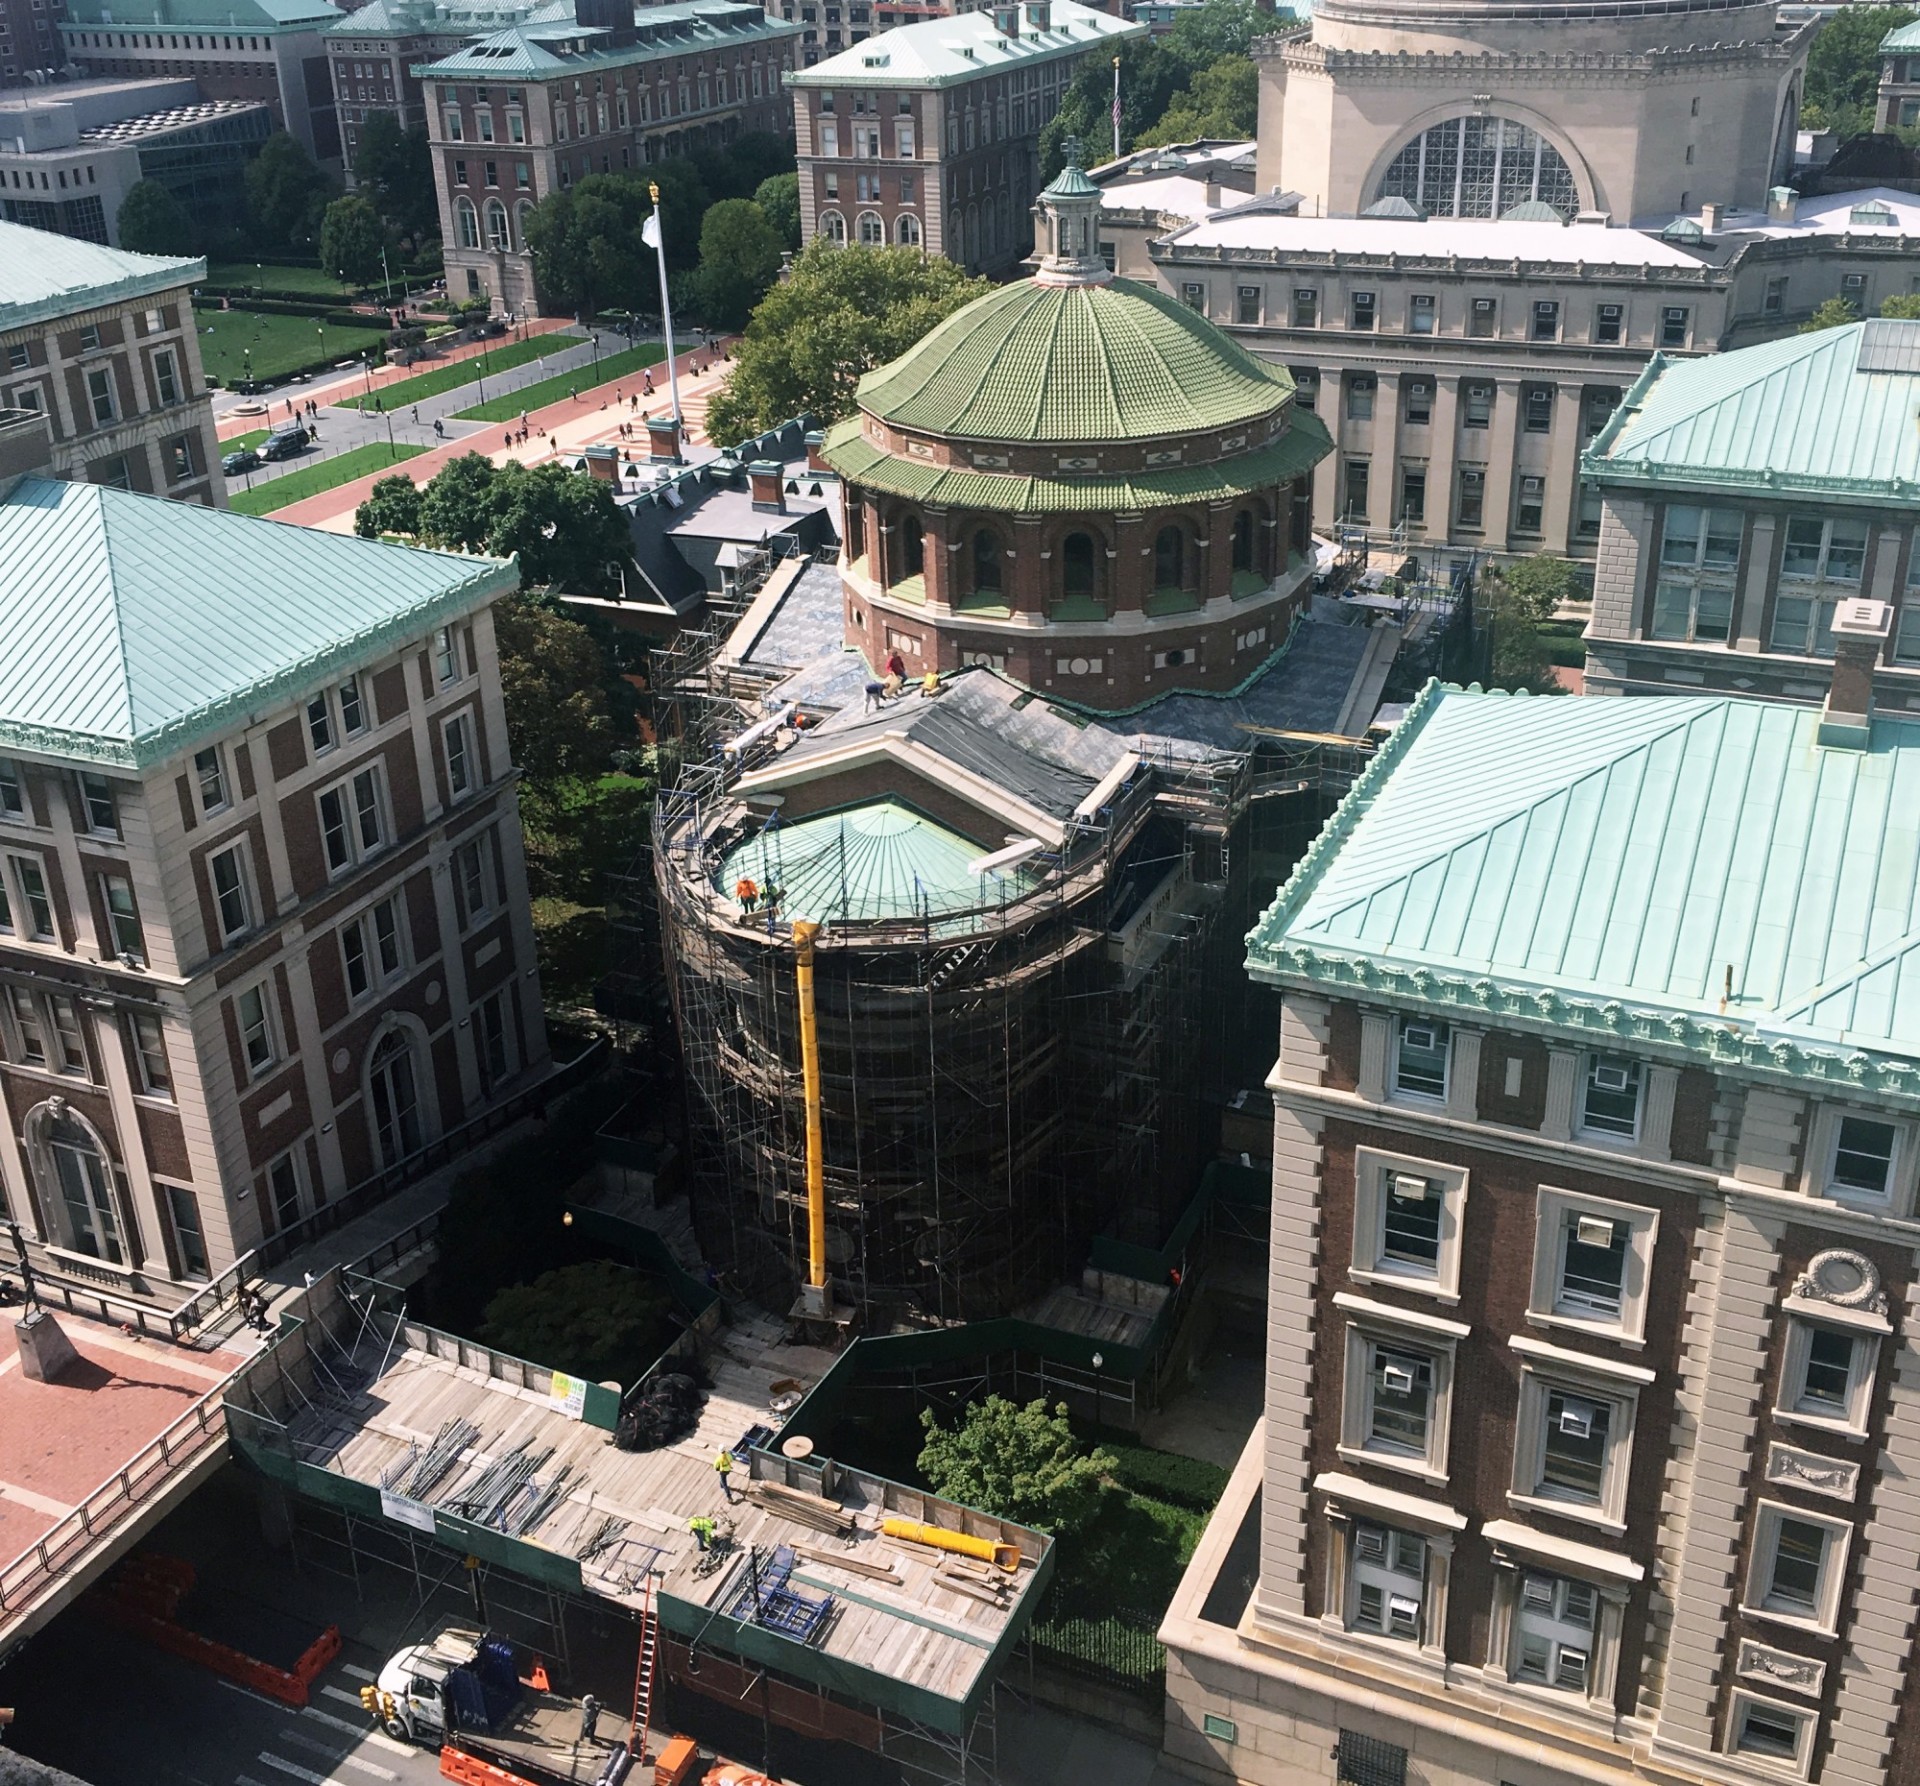 Aerial view of St. Paul's Chapel. The front portion of the chapel is obscured by layers of scaffolding. The new terra cotta tiles for the front roof have not yet been placed.